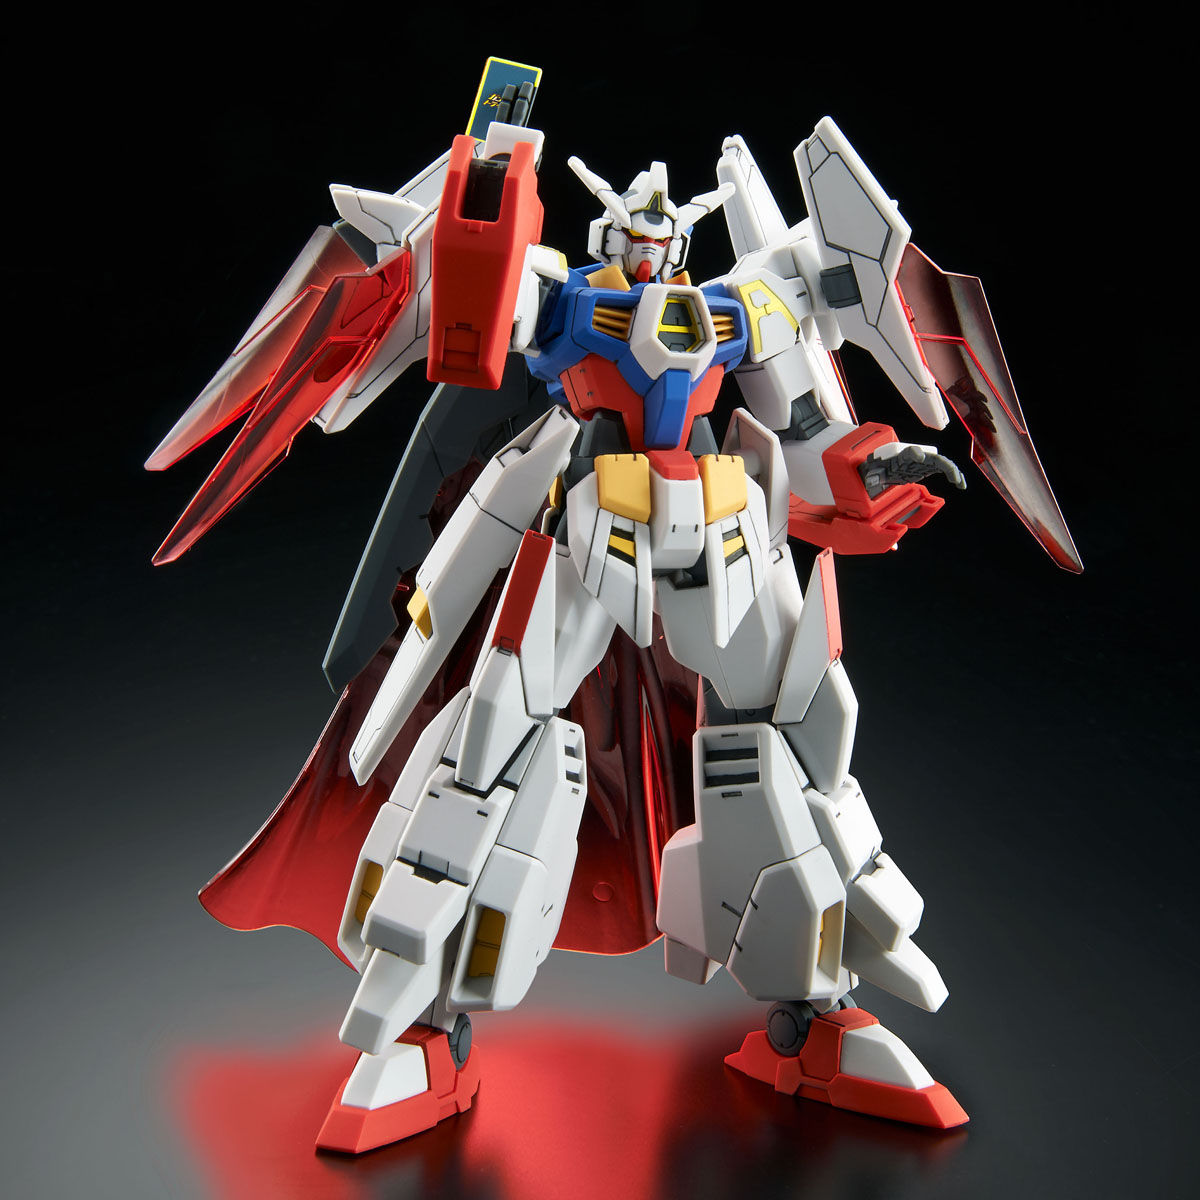 HG 1/144 AGE-TRY Gundam Try Age